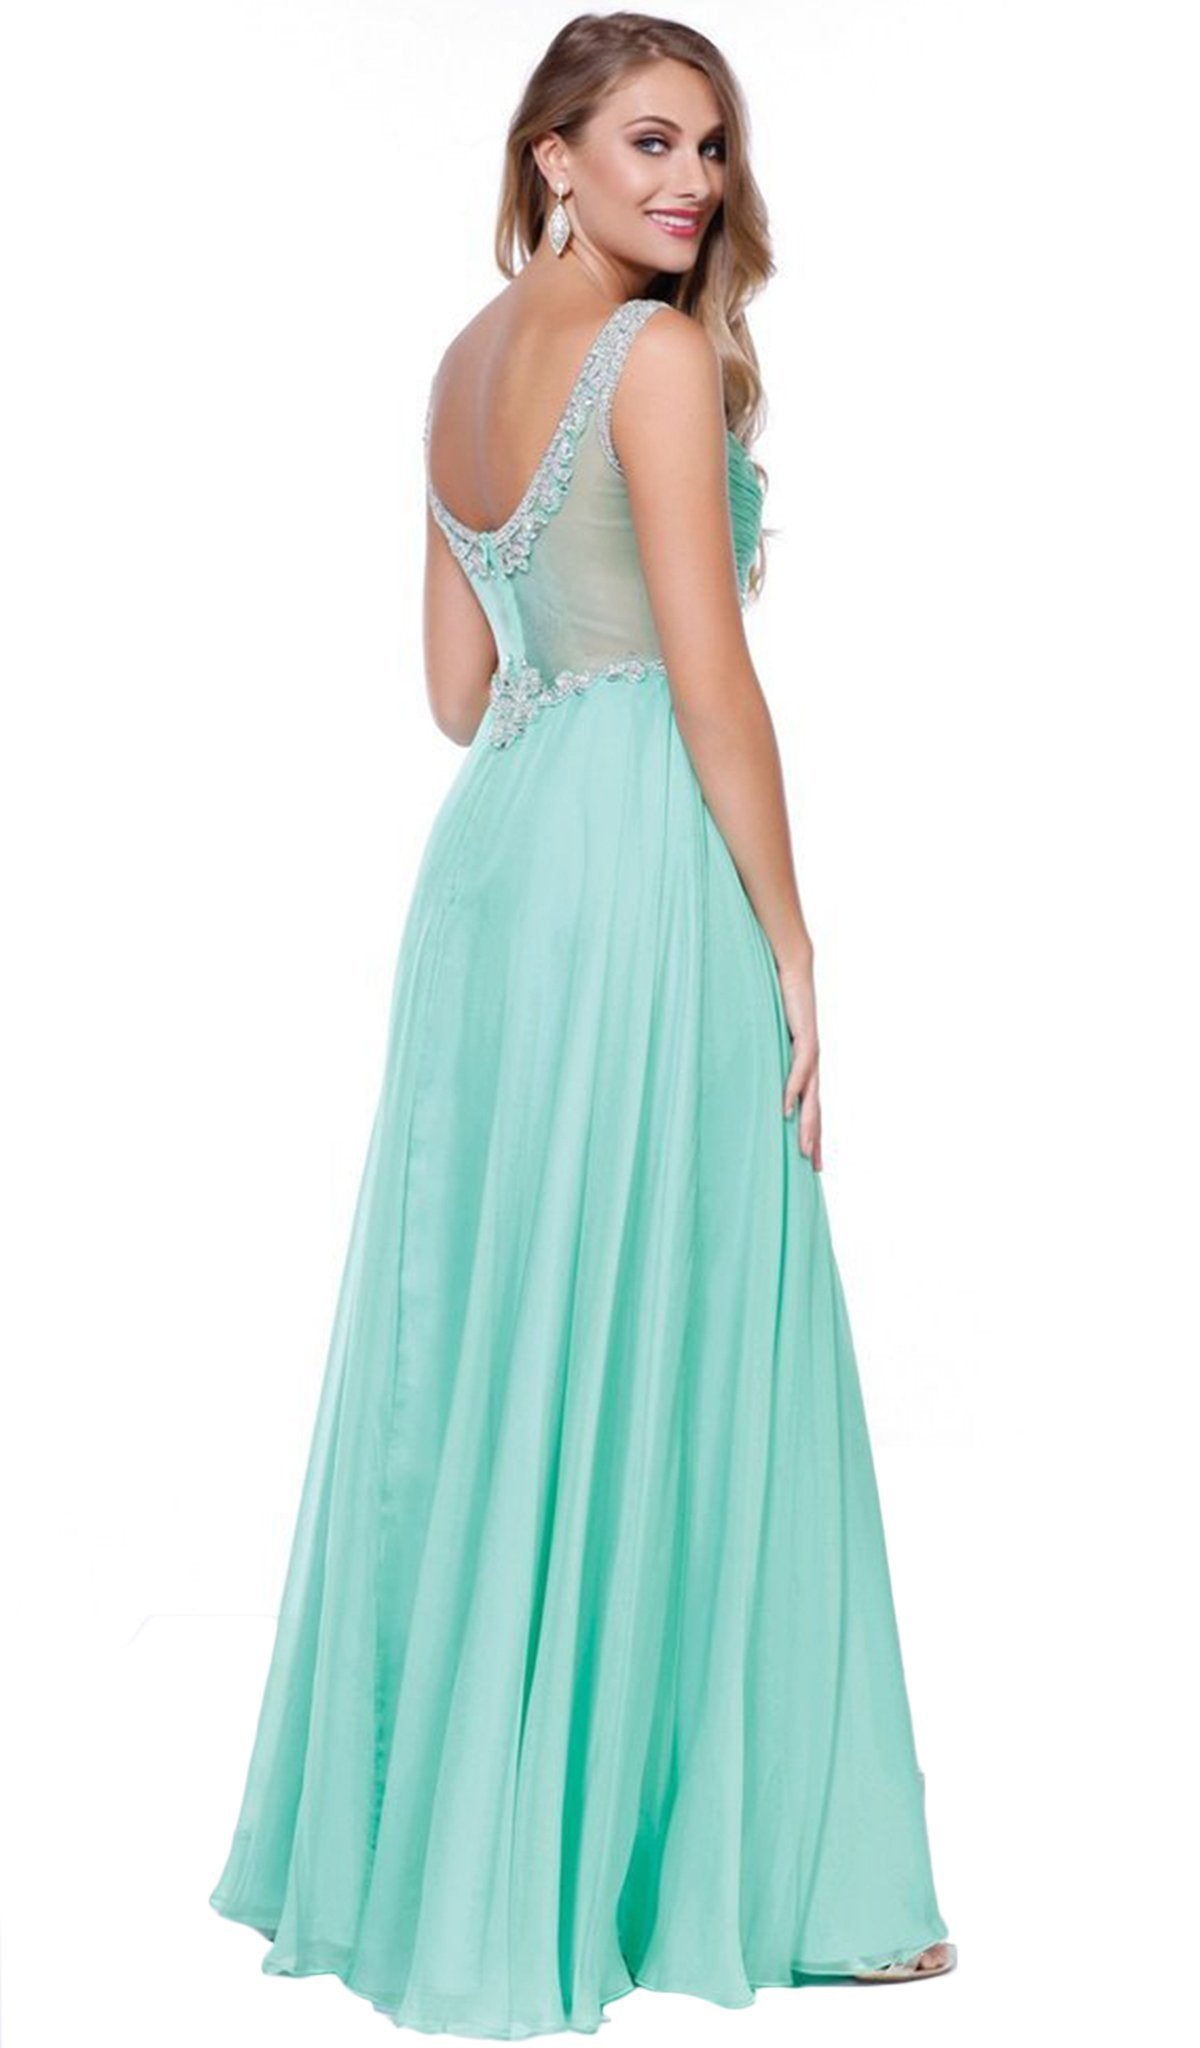 Nox Anabel - 8155 Bateau illusion Chiffon Gown Special Occasion Dress